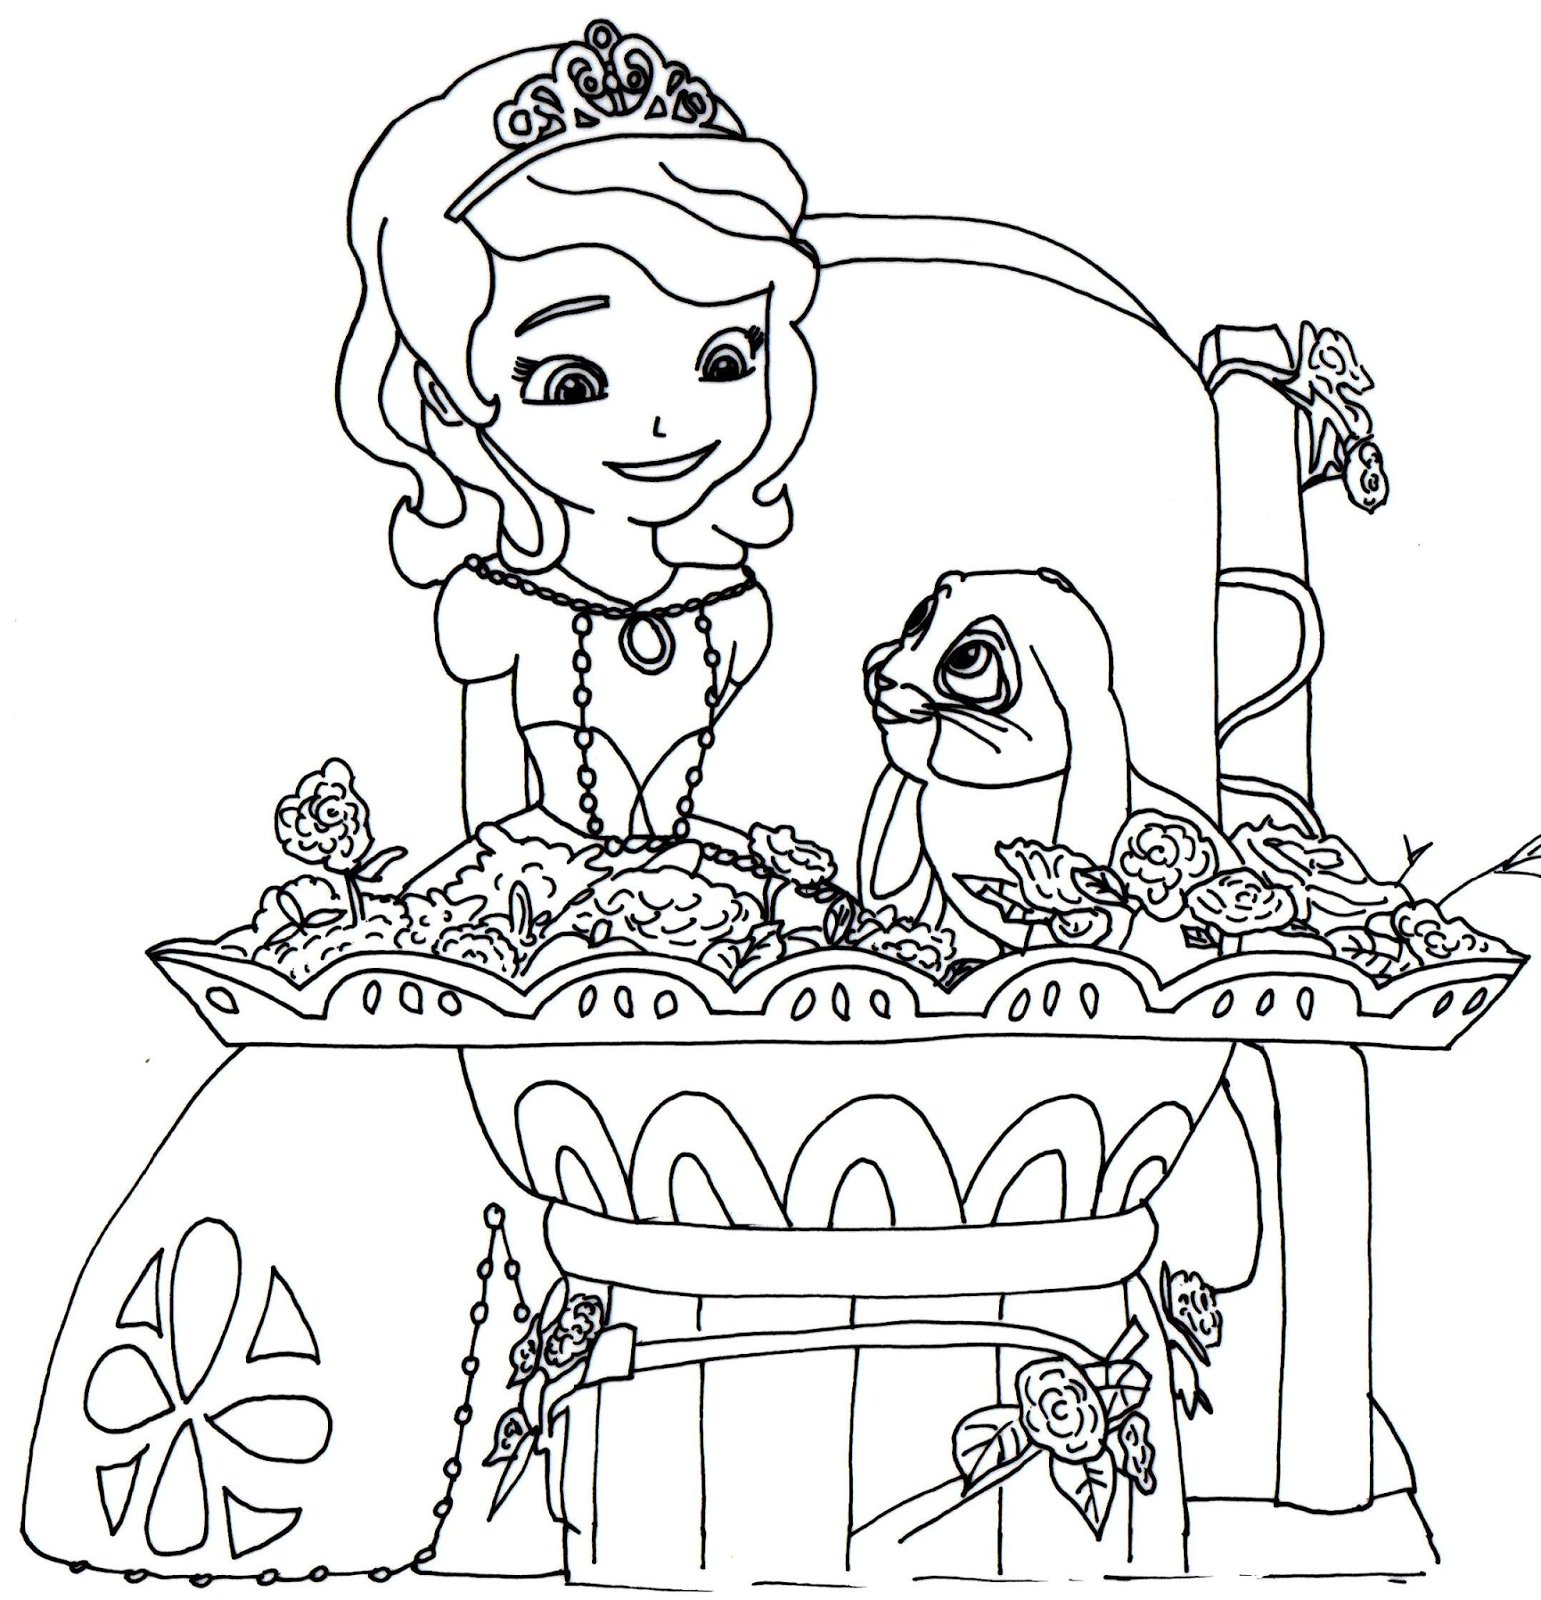 Sofia The First Coloring Pages Free at GetDrawings | Free download